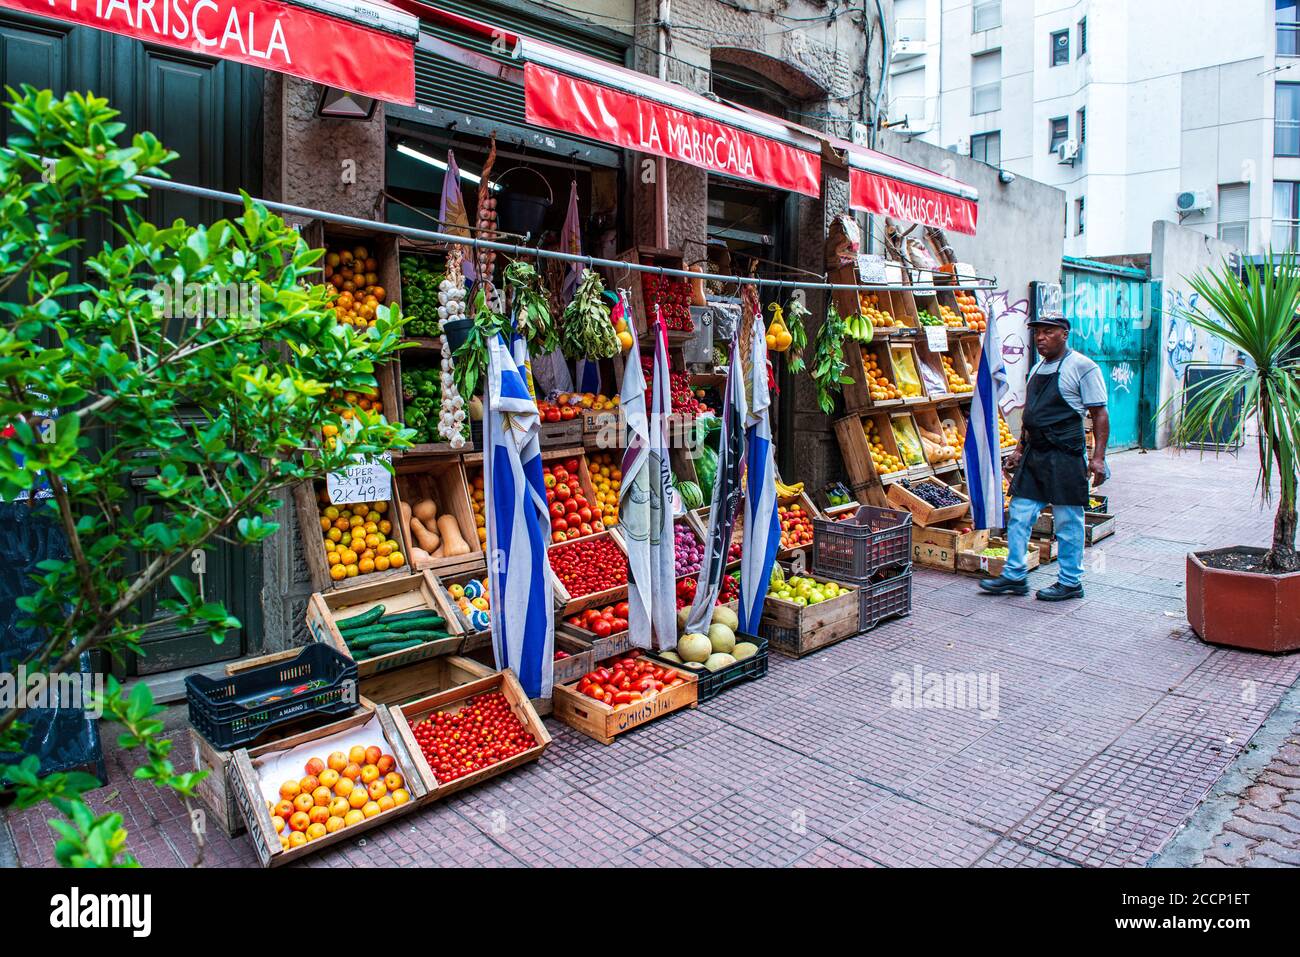 A market with fresh fruits and vegetable on the streets of the Old City area of Montevideo, Uruguay Stock Photo